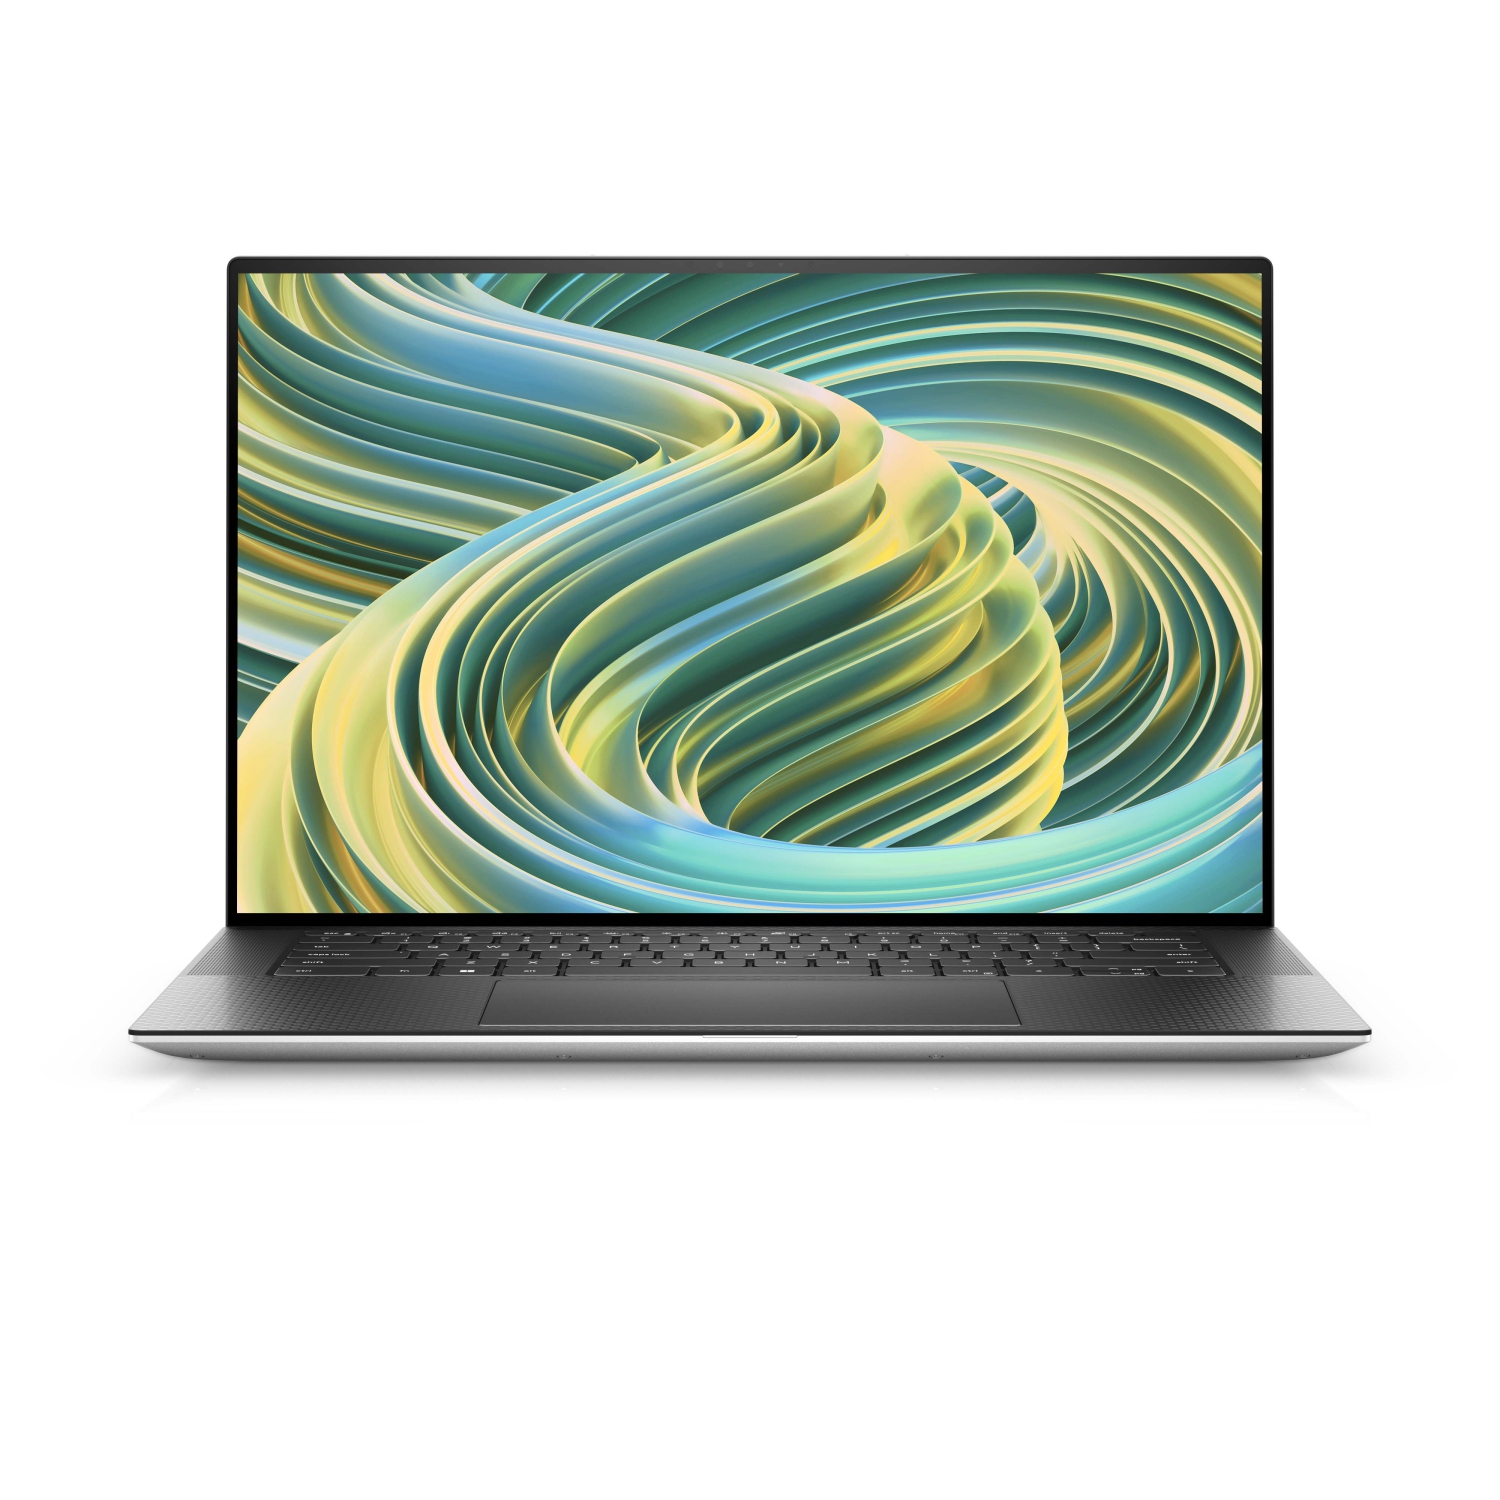 Dell XPS 15 9530 15.6" Laptop with 13th Gen Intel® Core™ i7, 512GB SSD, and 16GB RAM